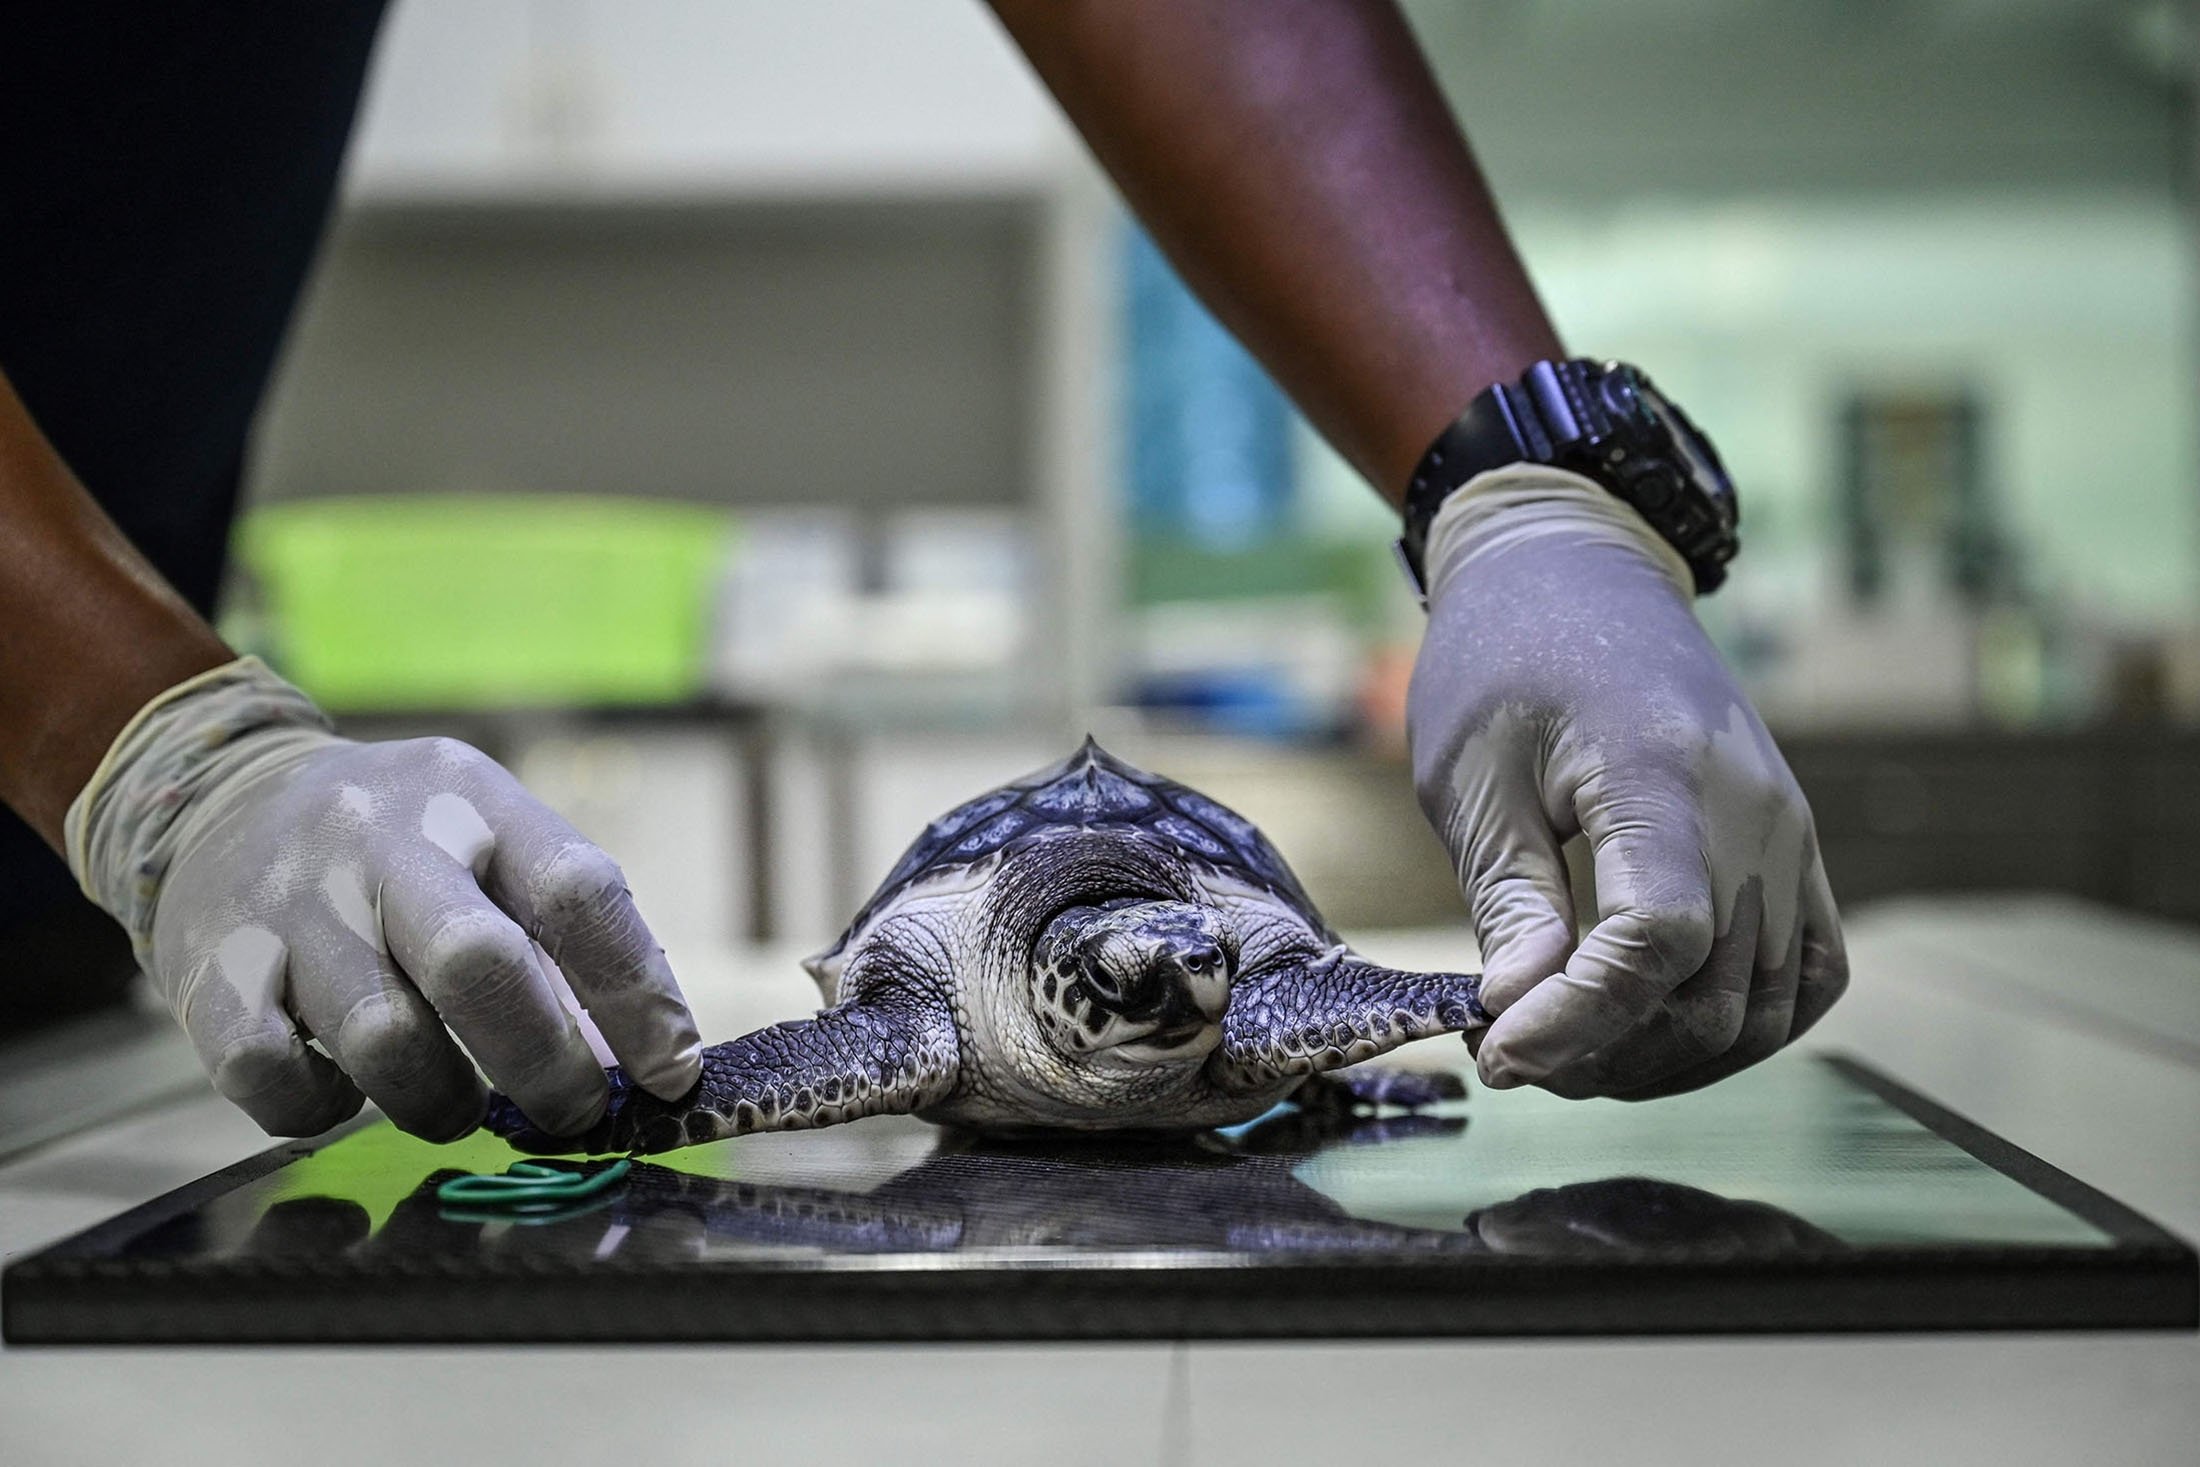 A marine biologist spreads out the flippers of a sea turtle for an X-ray at the Phuket Marine Biological Center in Phuket, Thailand, Nov. 23, 2021. (AFP Photo)